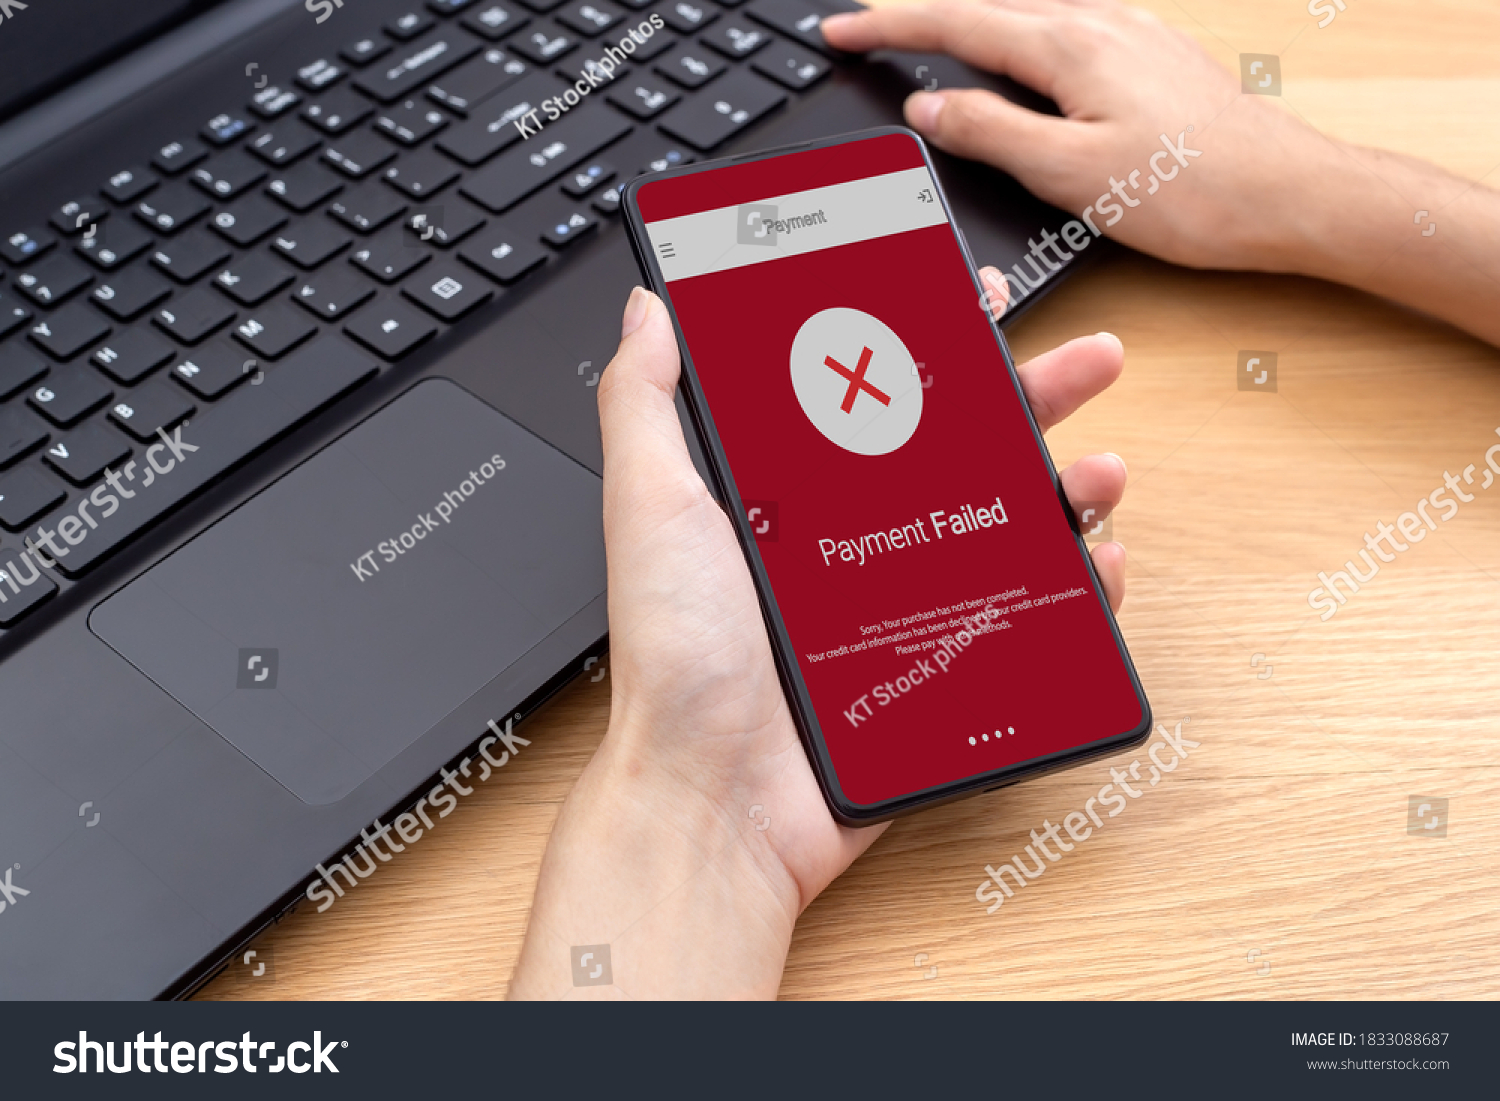 Female using mobile phone online payment failed on red screen, declined transaction invalid purchase. payment failed error try again, Concept banking online shopping mobile payment. #1833088687